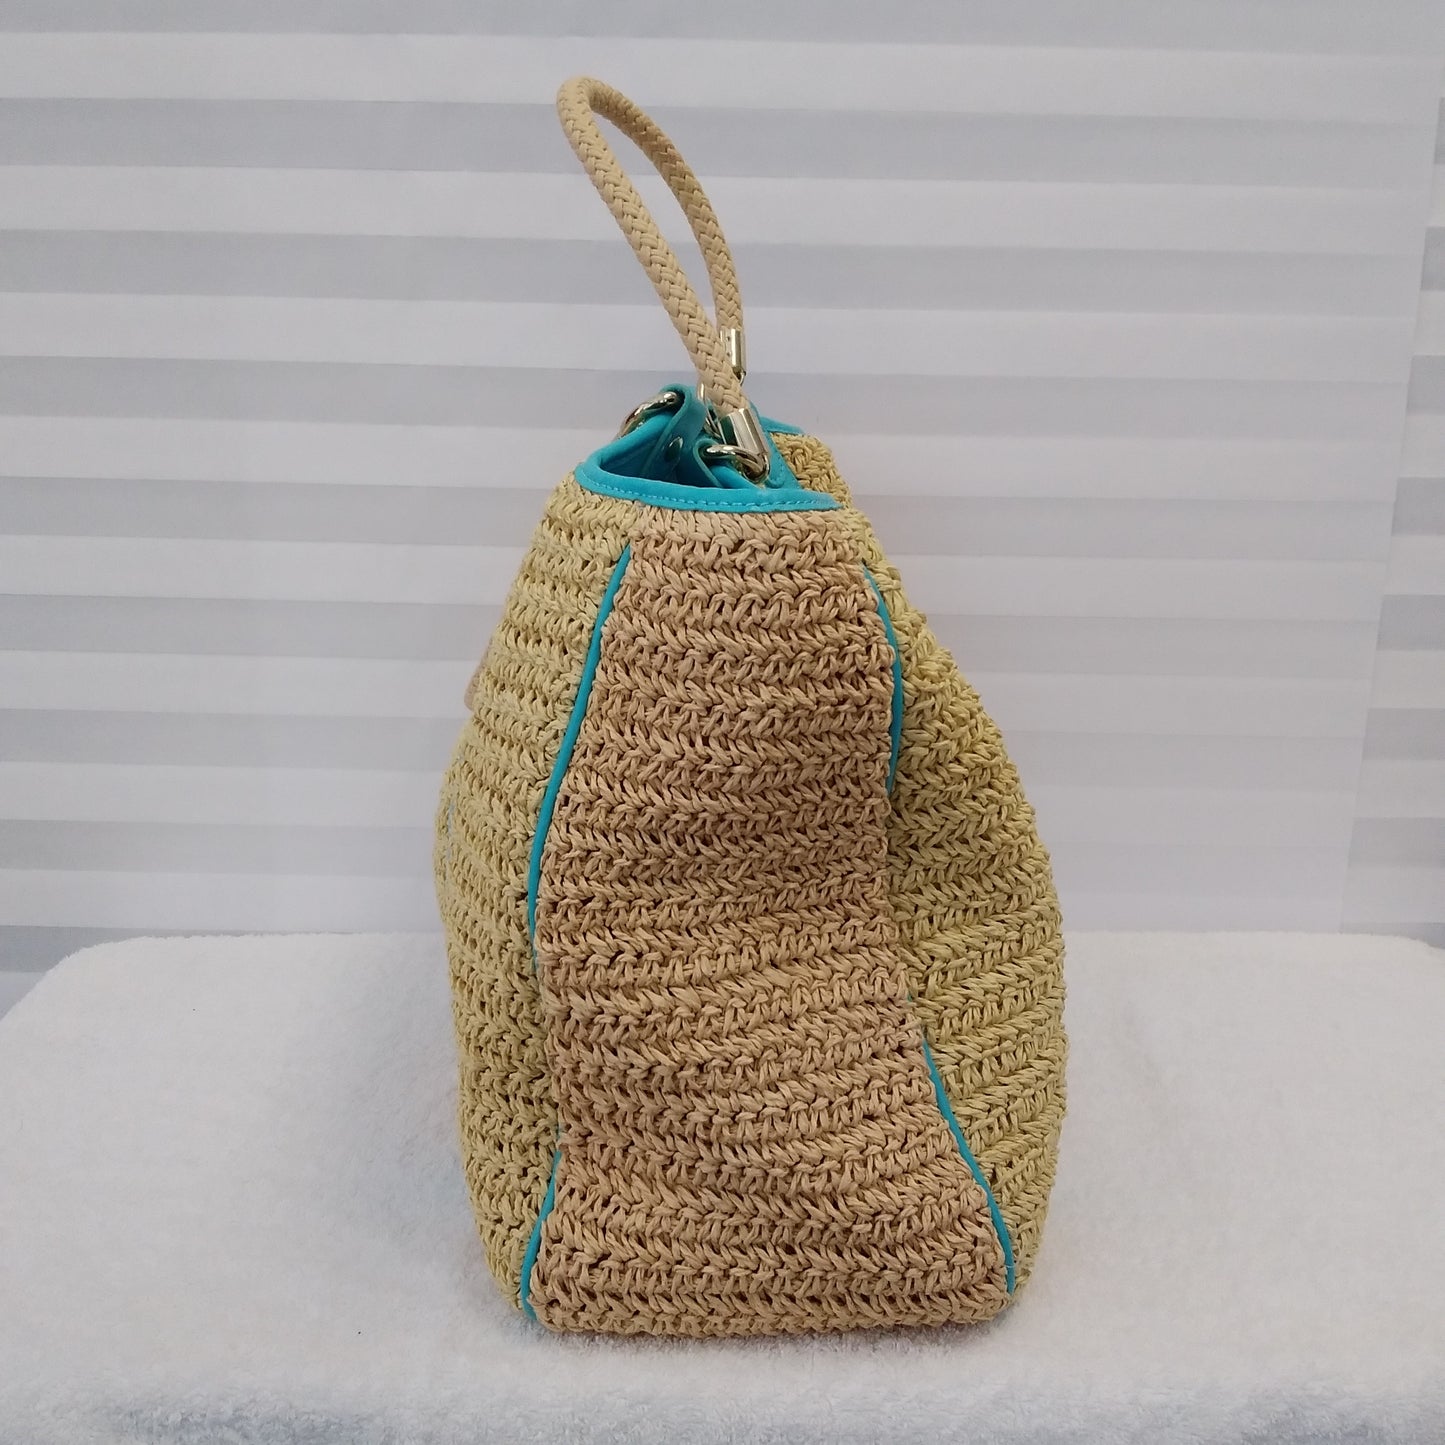 Talbots Large Woven Straw Tote Bag With Teal Leather Trim and Gold Accents